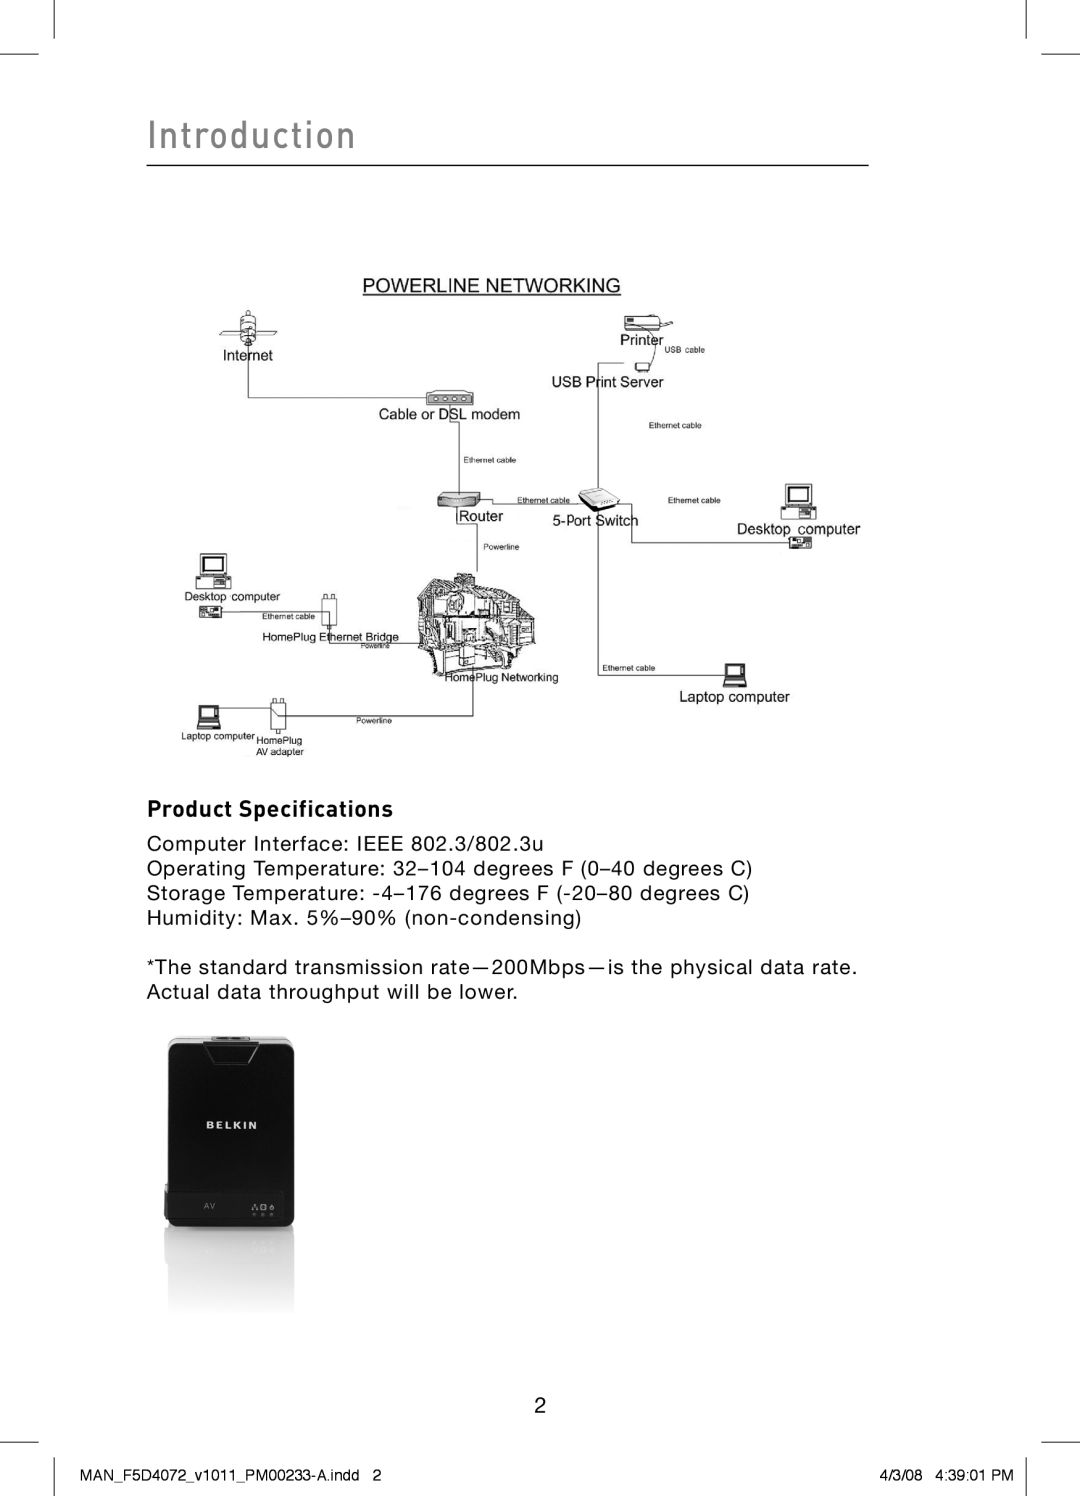 Belkin F5D4072 user manual Introduction, Product Specifications 